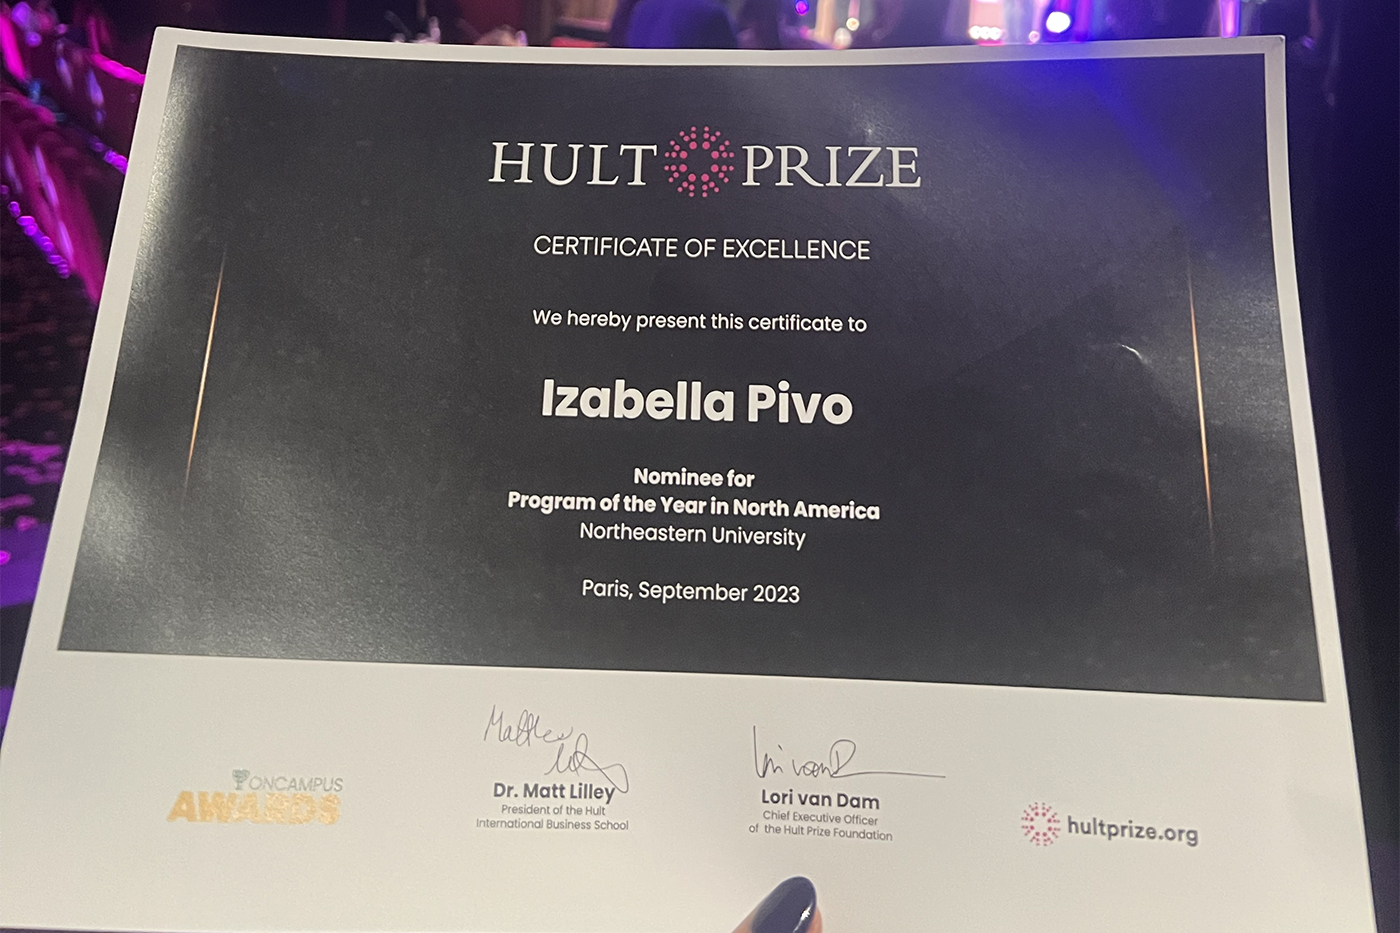 Paper certificate that reads Hult Prize Certificate of Excellence. We hereby present this certificate to Izabella Pivo, Nominee for Program of the Year in North America, Northeastern University.